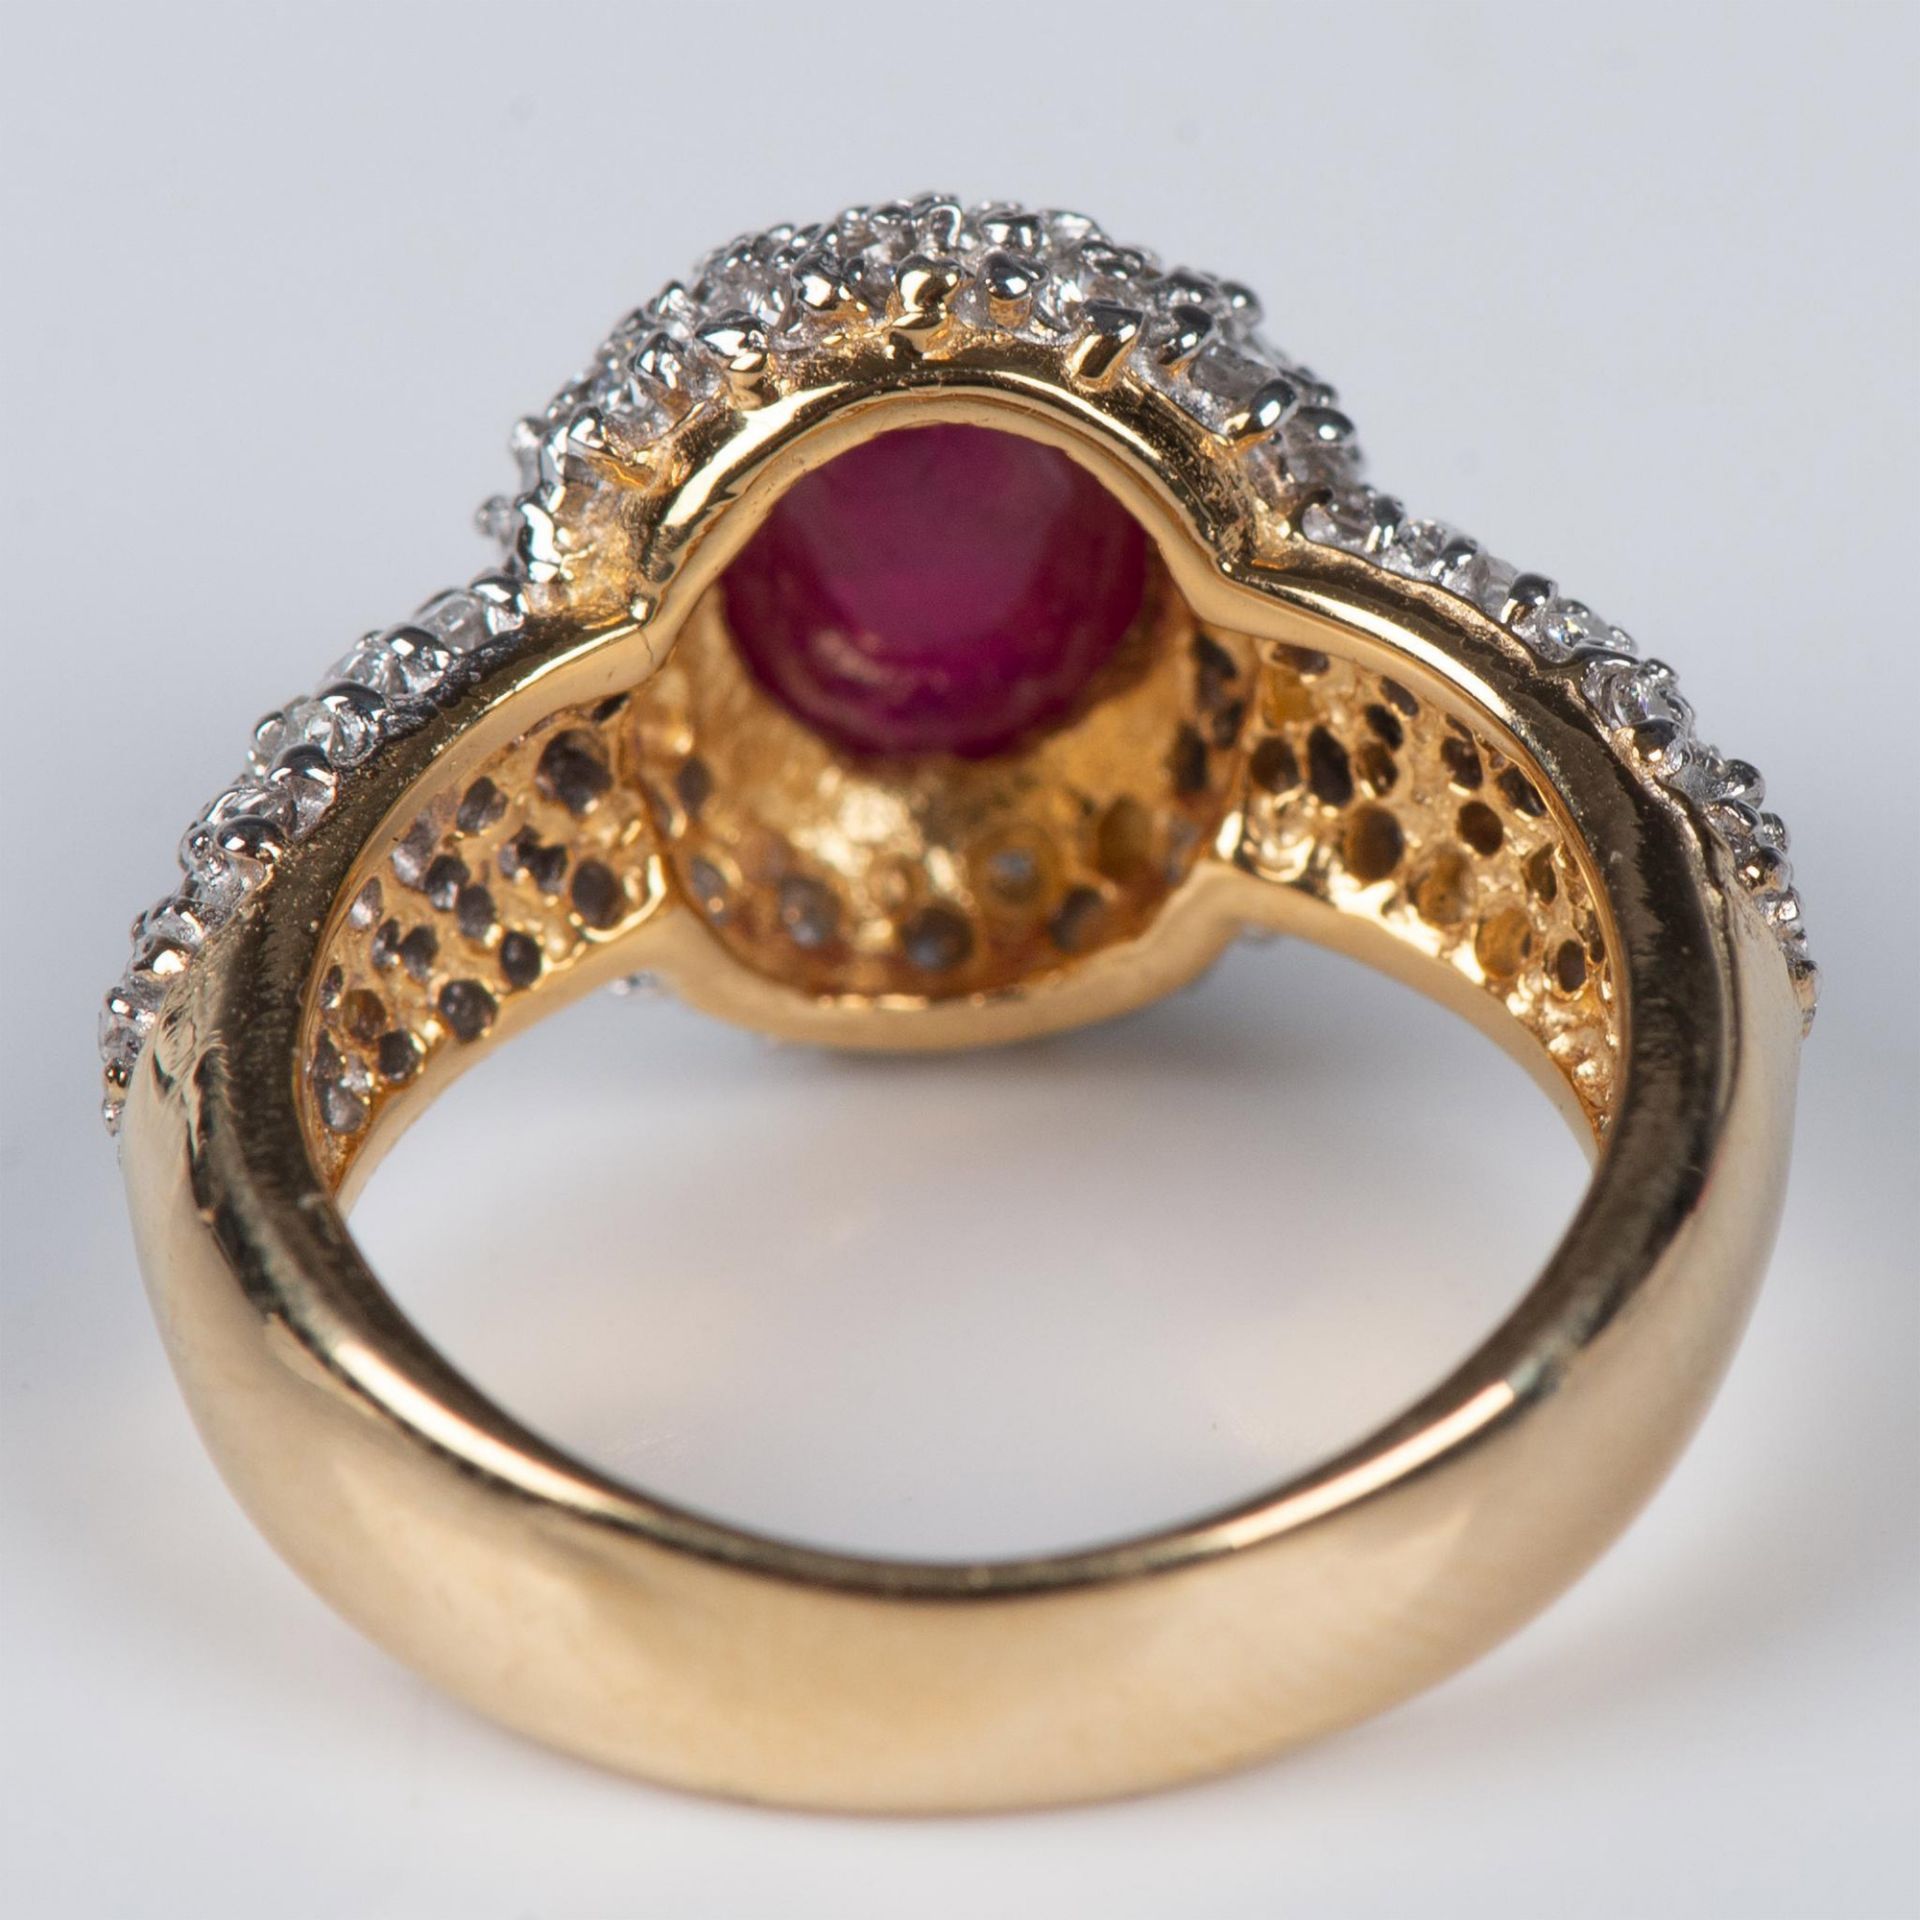 Fabulous 14K Yellow Gold, Diamond, and Ruby 2.9ctw Ring - Image 6 of 11